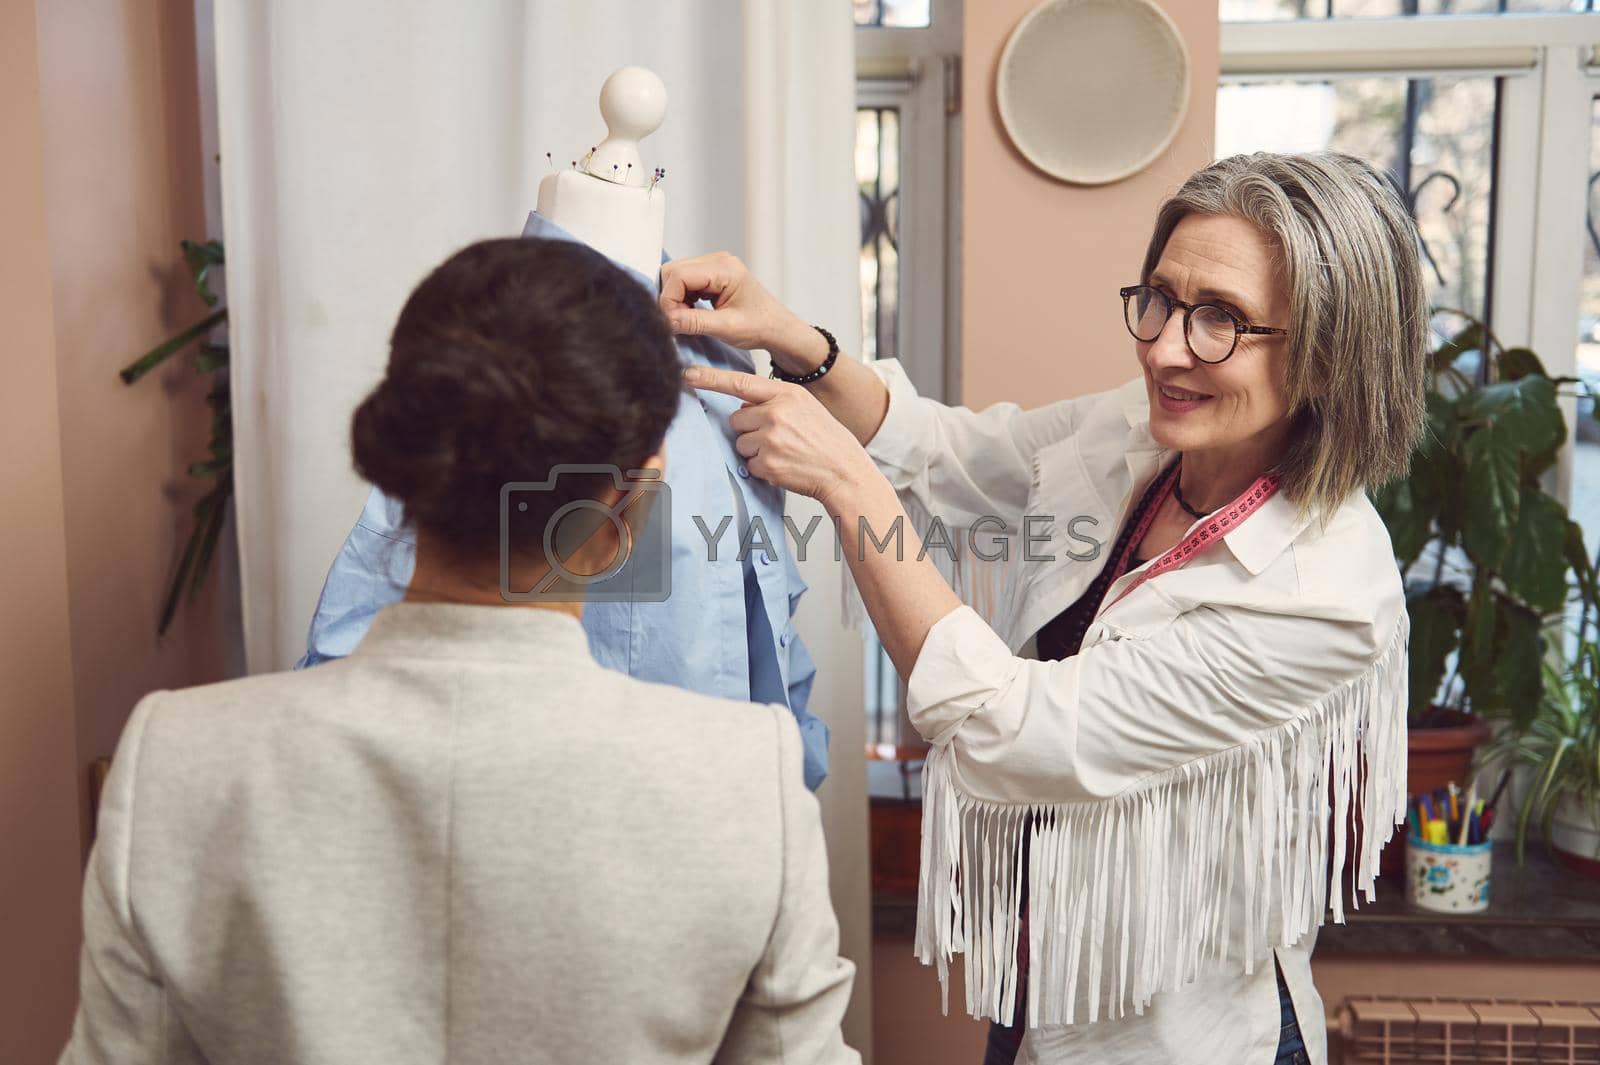 Royalty free image of Skilled team of fashion designers tailors try on the new collection of women's dress shirt on a mannequin and work to improve the style and design of the new garments in the tailoring atelier by artgf